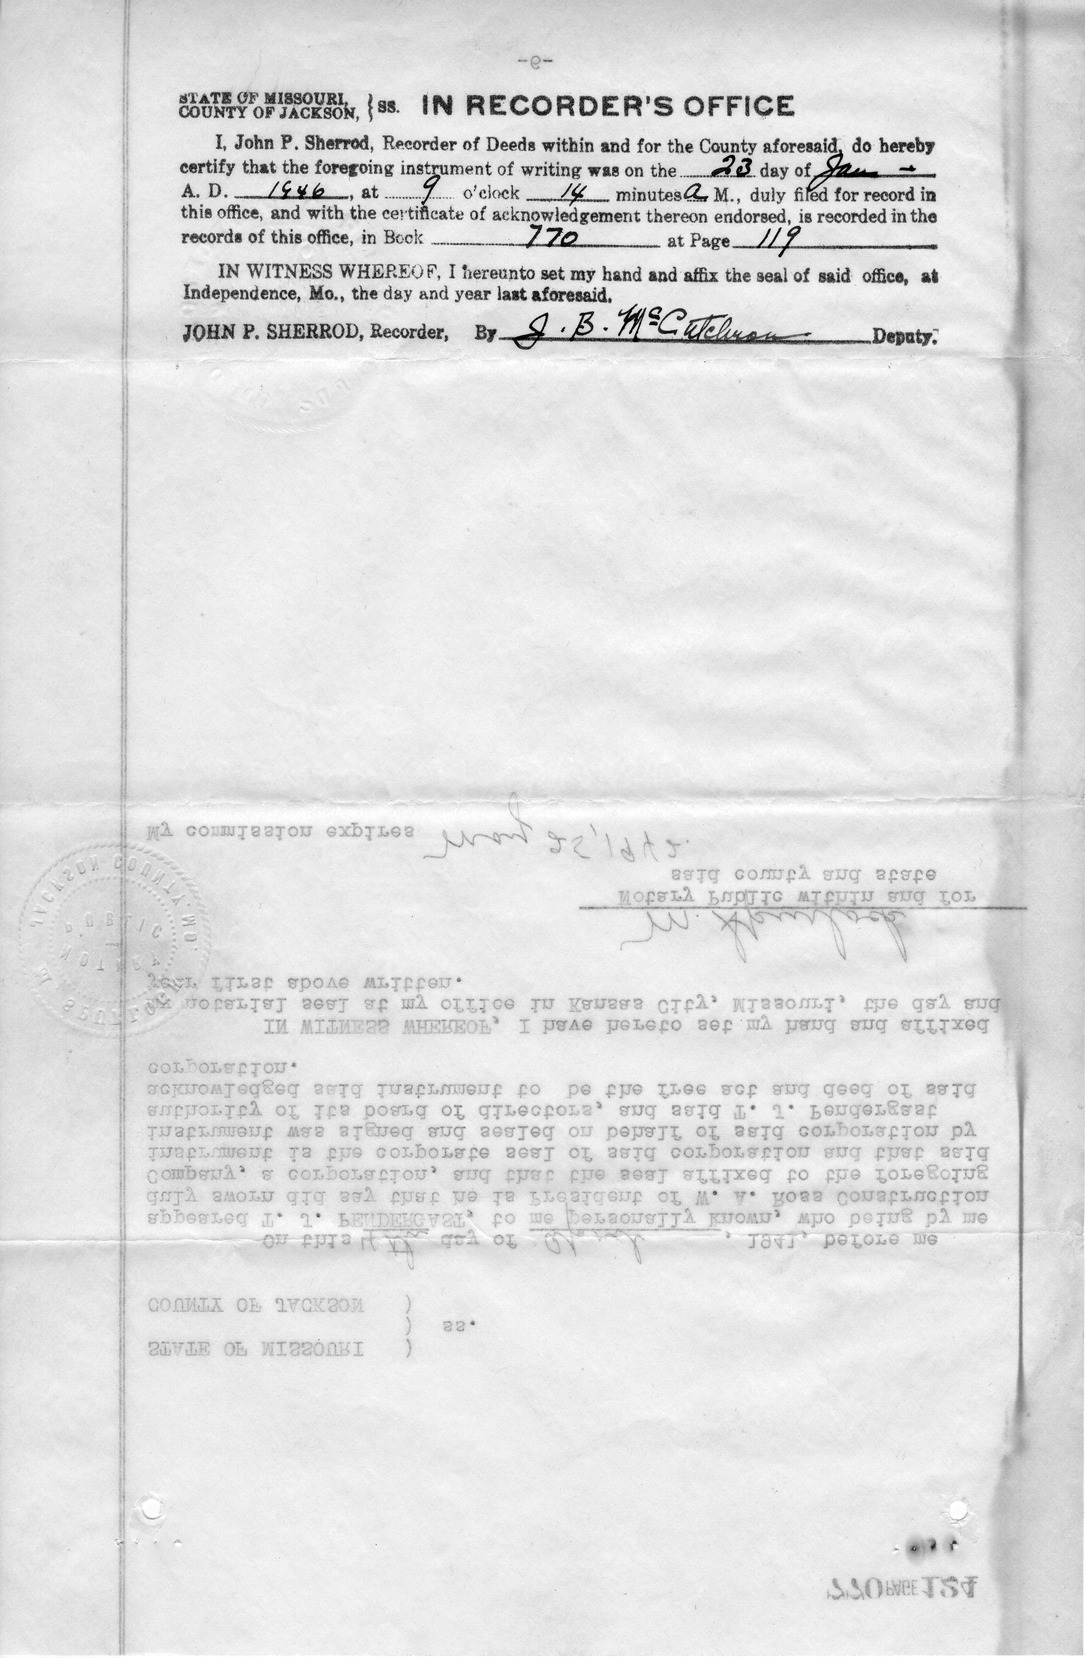 Bill of Sale and Assignment for W. A. Ross Construction Company